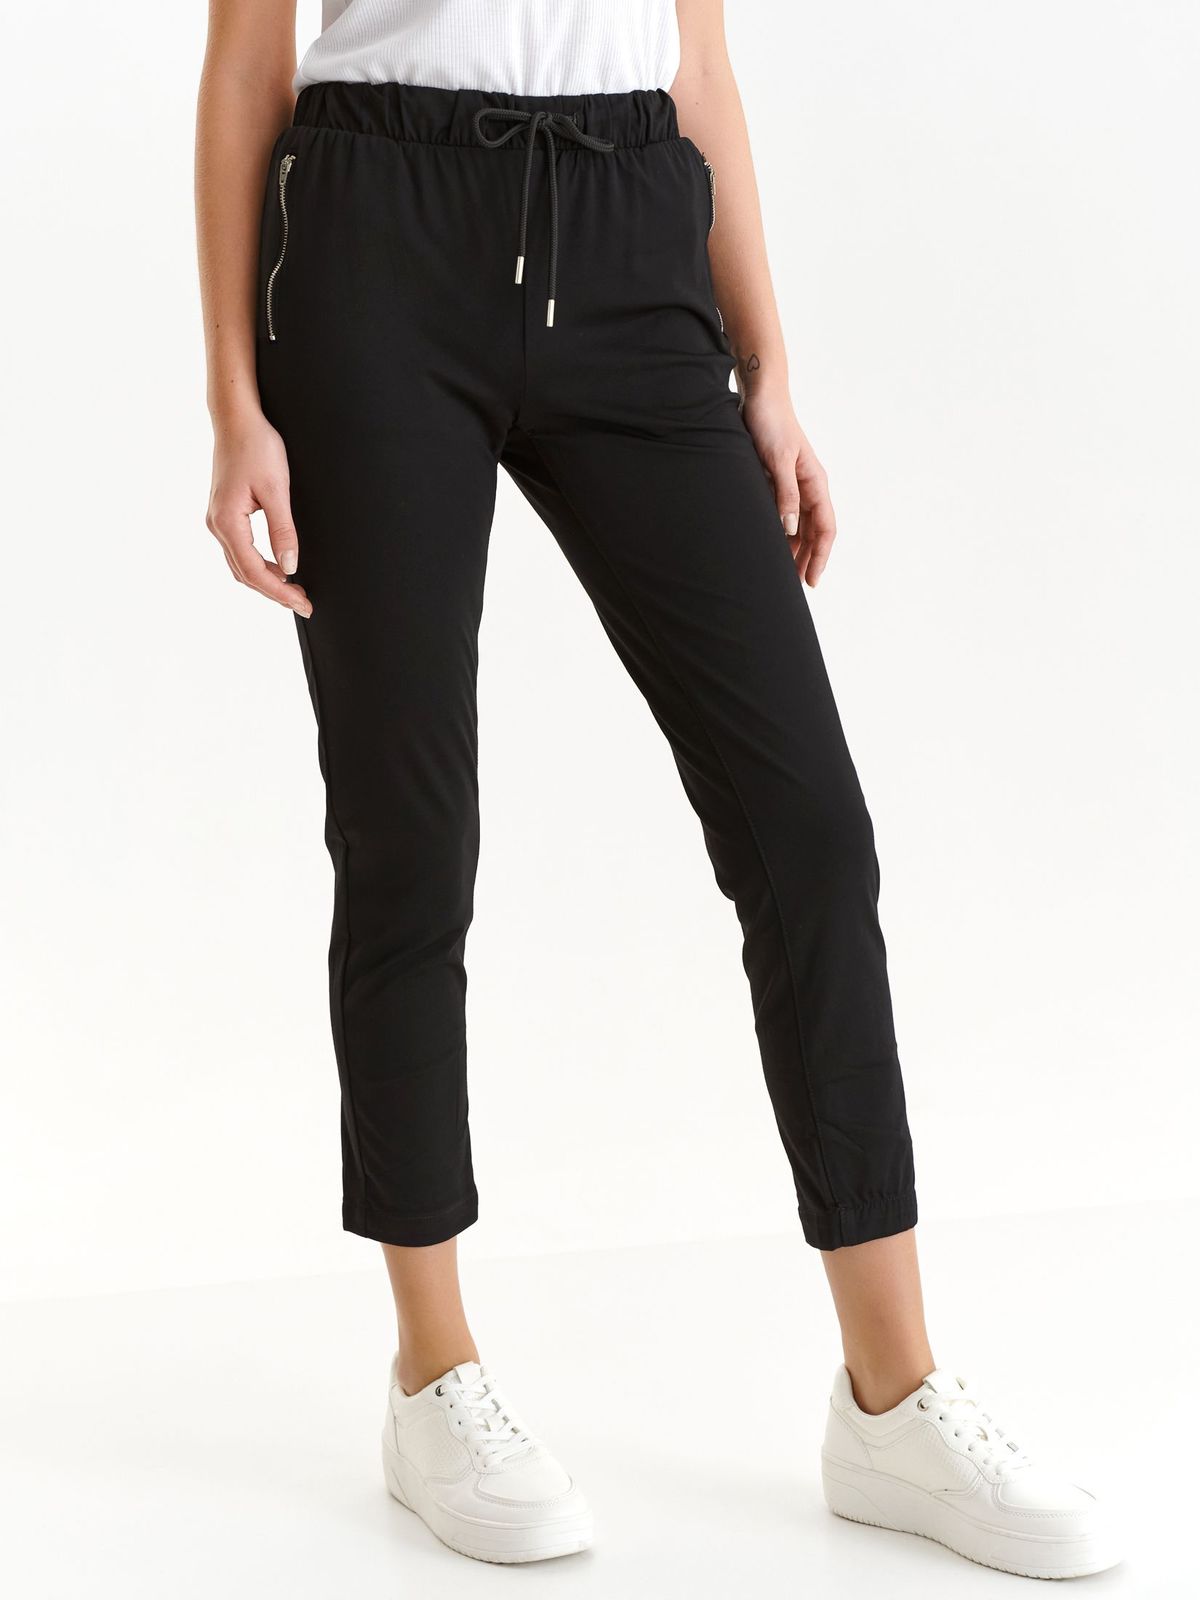 Black trousers from elastic fabric conical with zipper details pockets